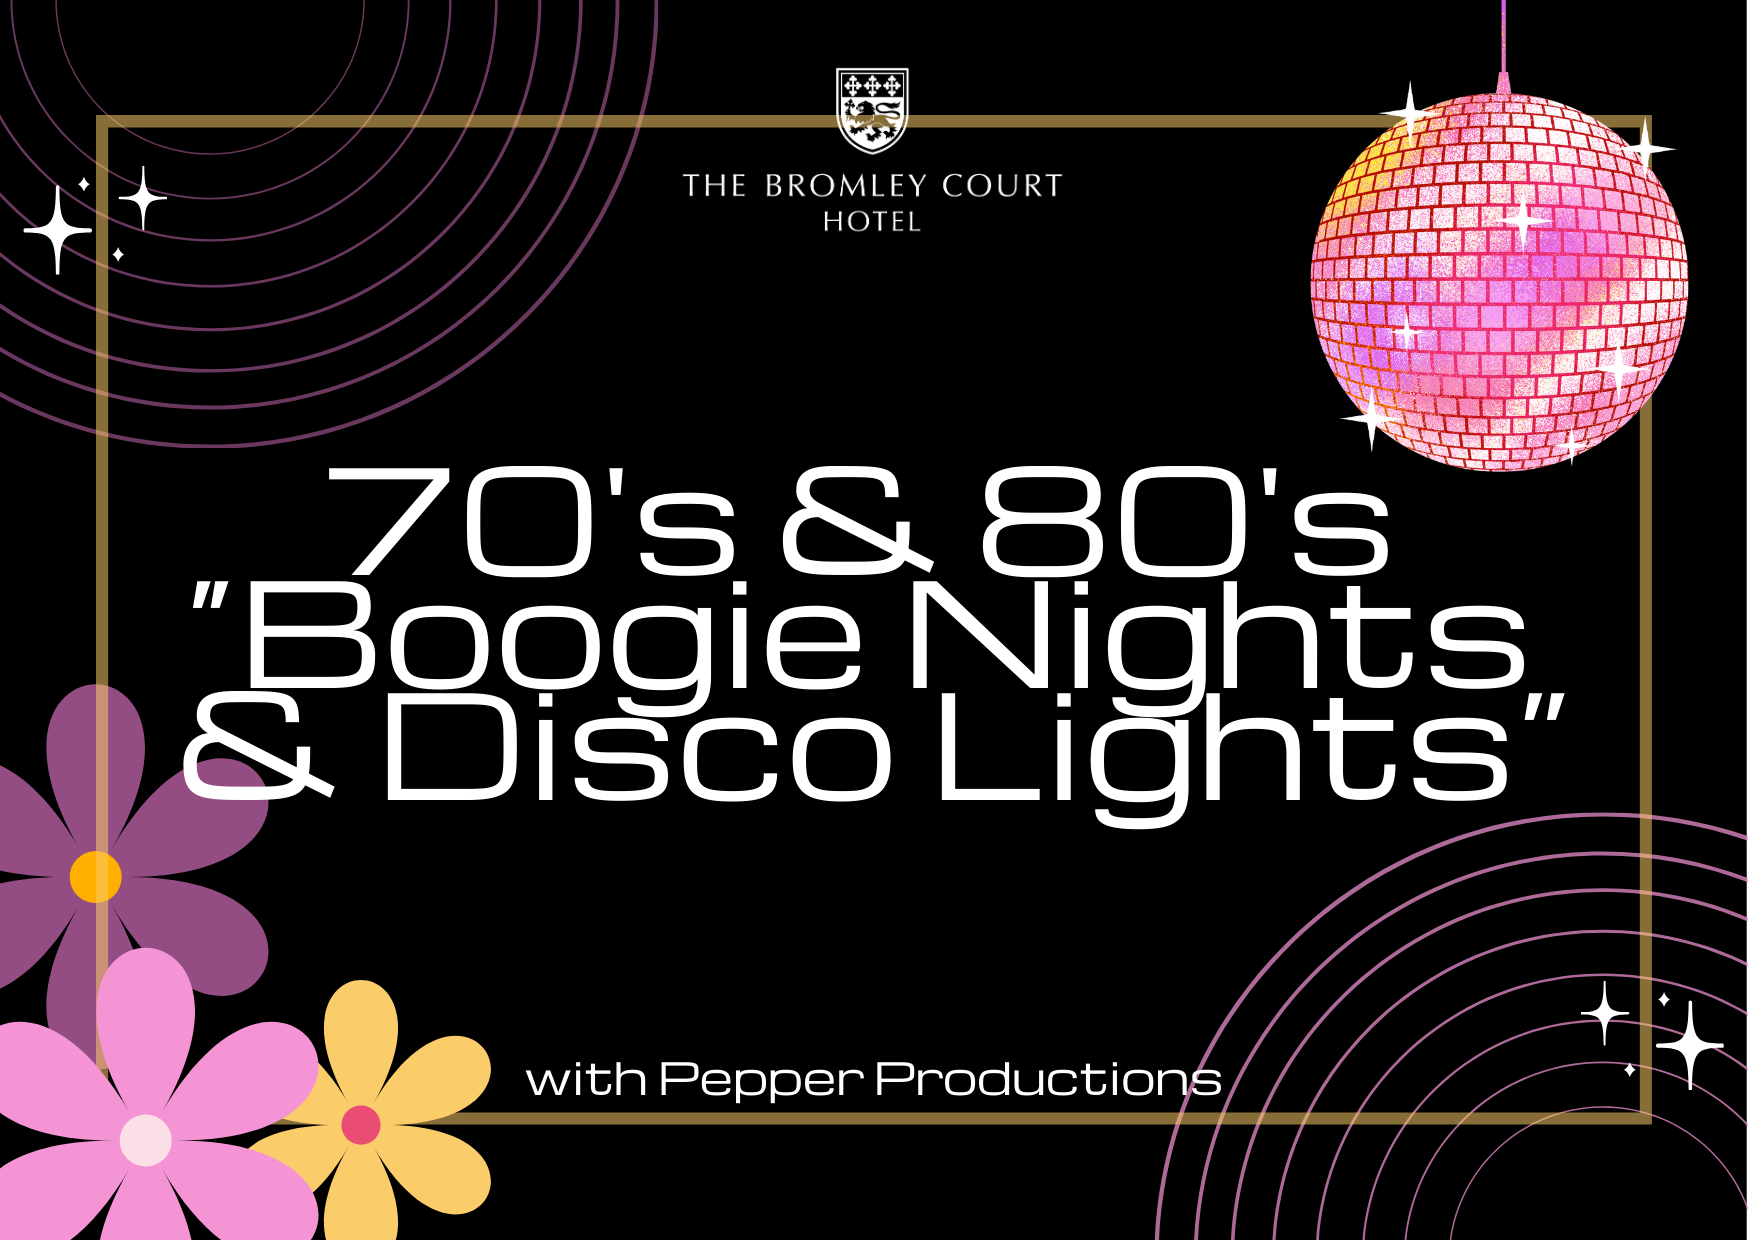 70's & 80's Night at The Bromley Court Hotel